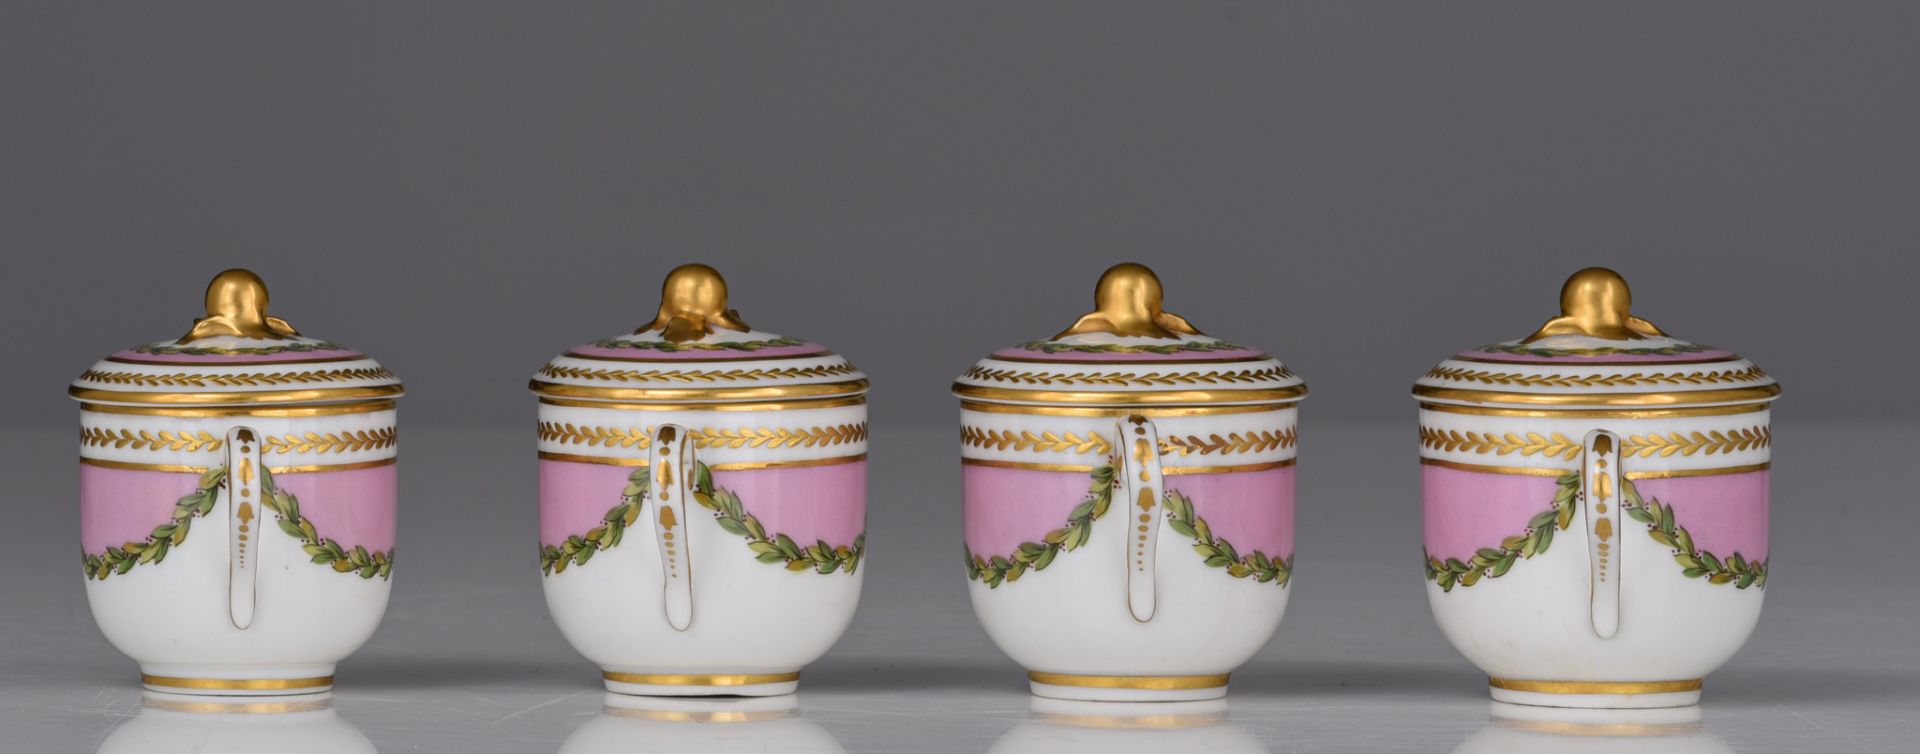 (BIDDING ONLY ON CARLOBONTE.BE) A 12 person Sevres porcelain set of dessert cups on a matching tray, - Image 12 of 18